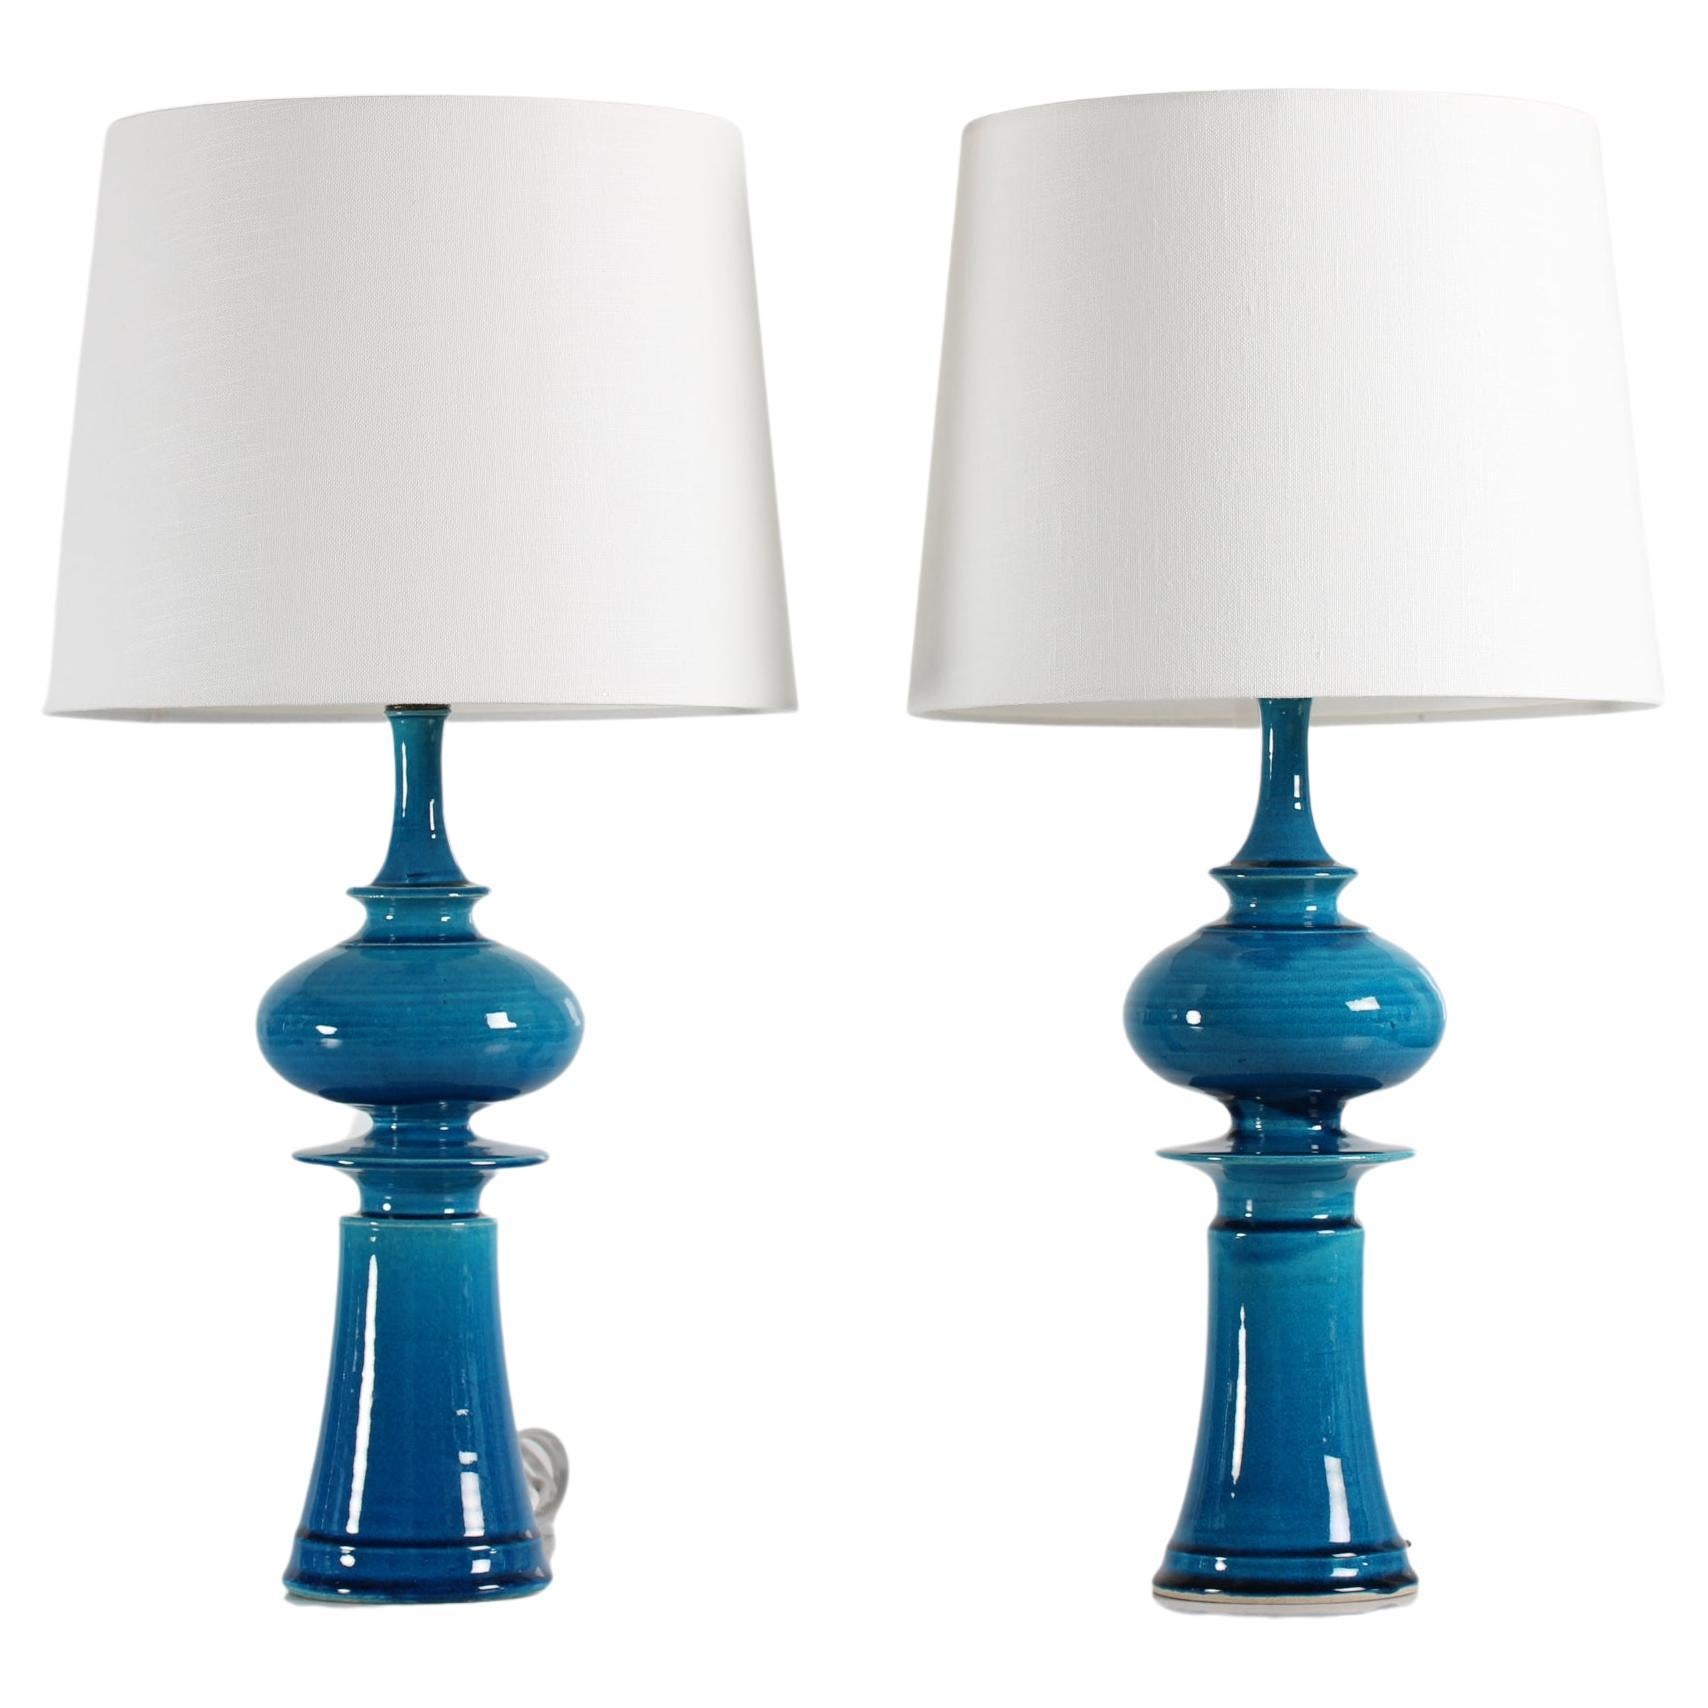 Pair of Kähler Tall Sculptural Turquoise Table Lamps by Poul Erik Eliasen, 1970s